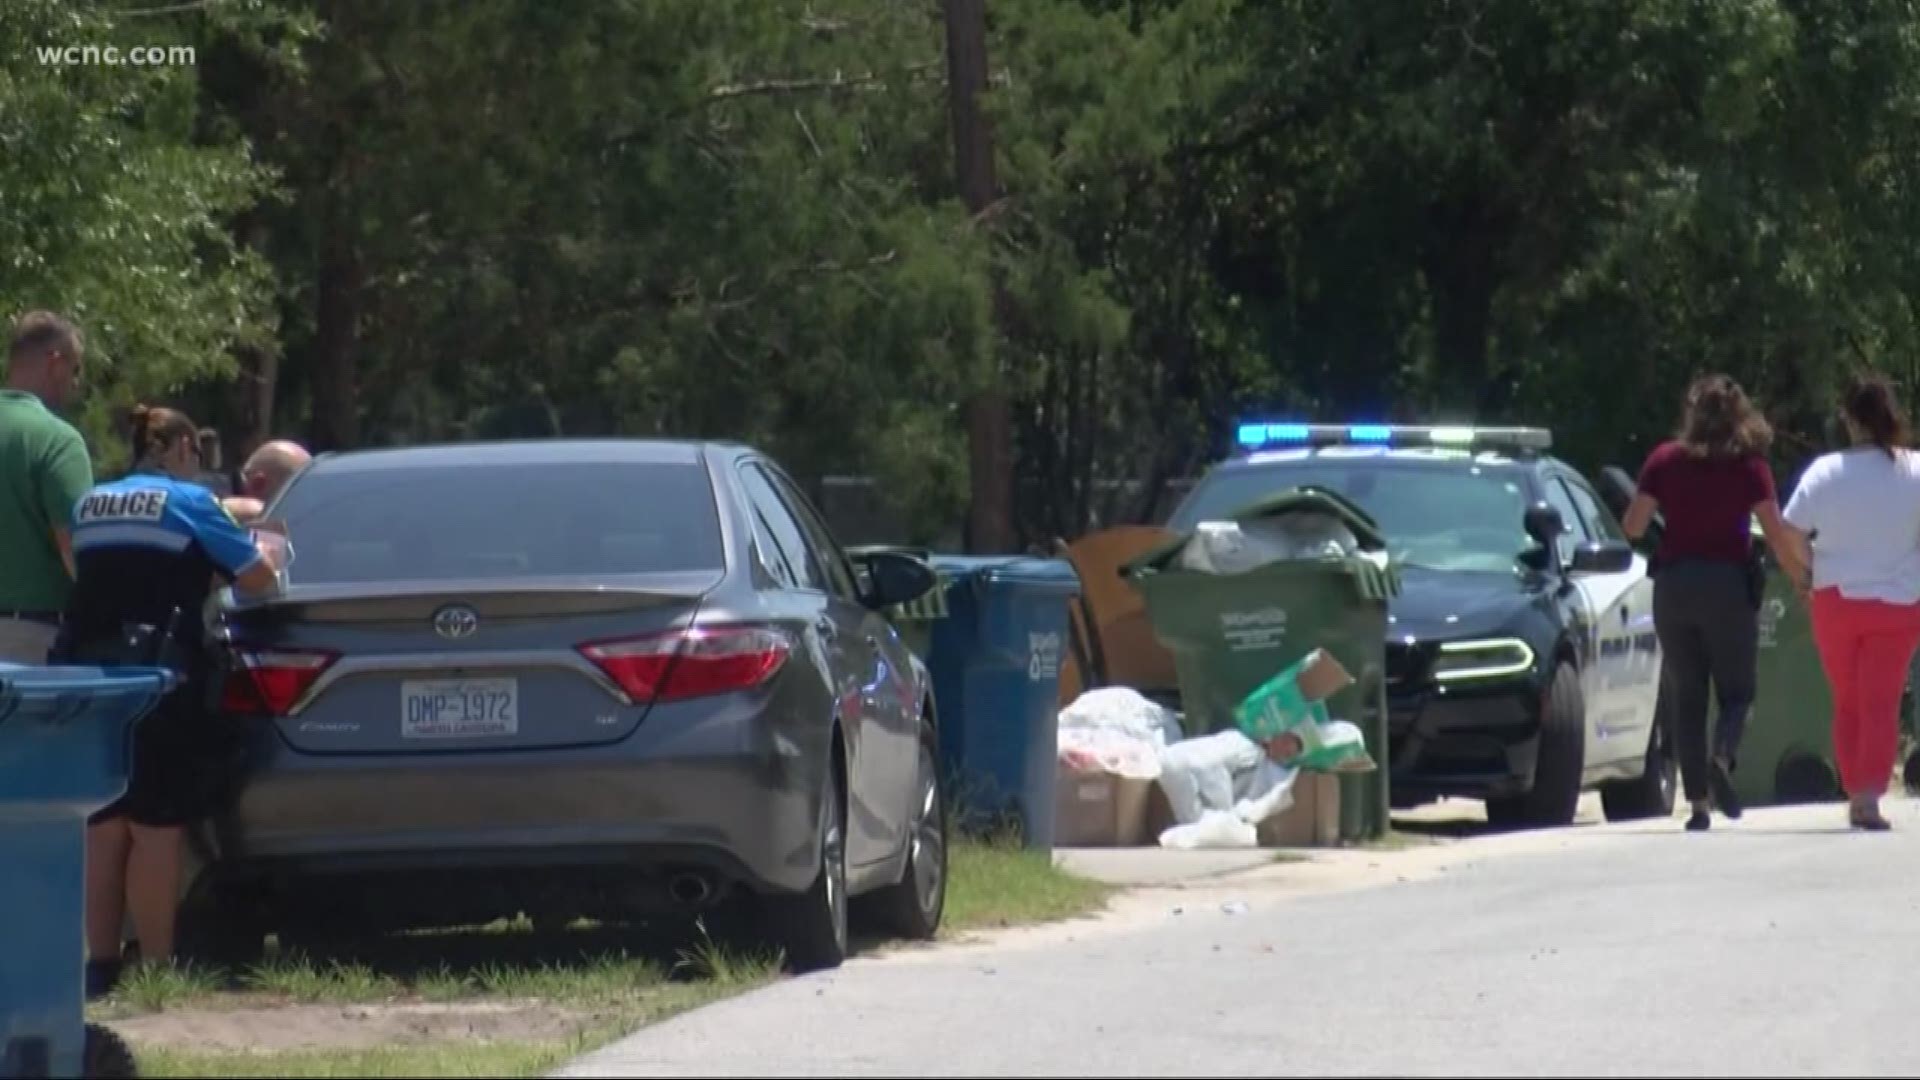 According to police in Wilmington, a family member who was driving the car immediately stopped when they realized they had run over the child.